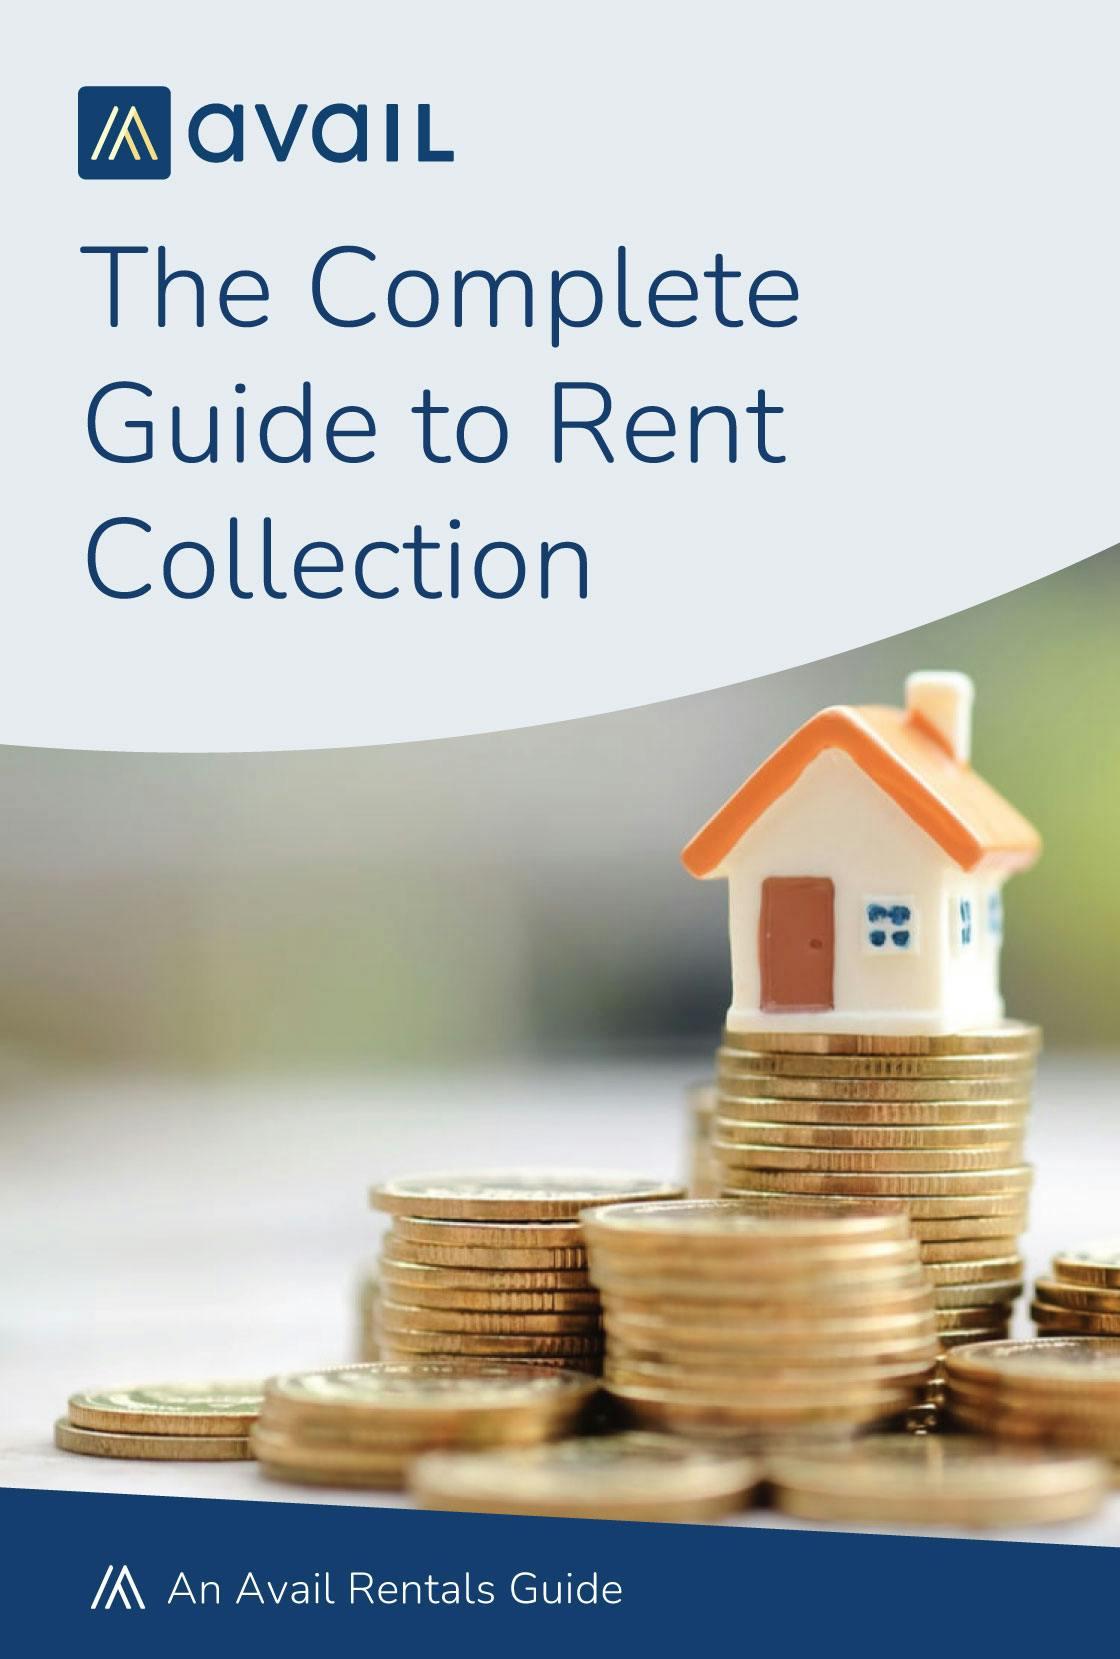 The Complete Guide to Rent Collection Guide